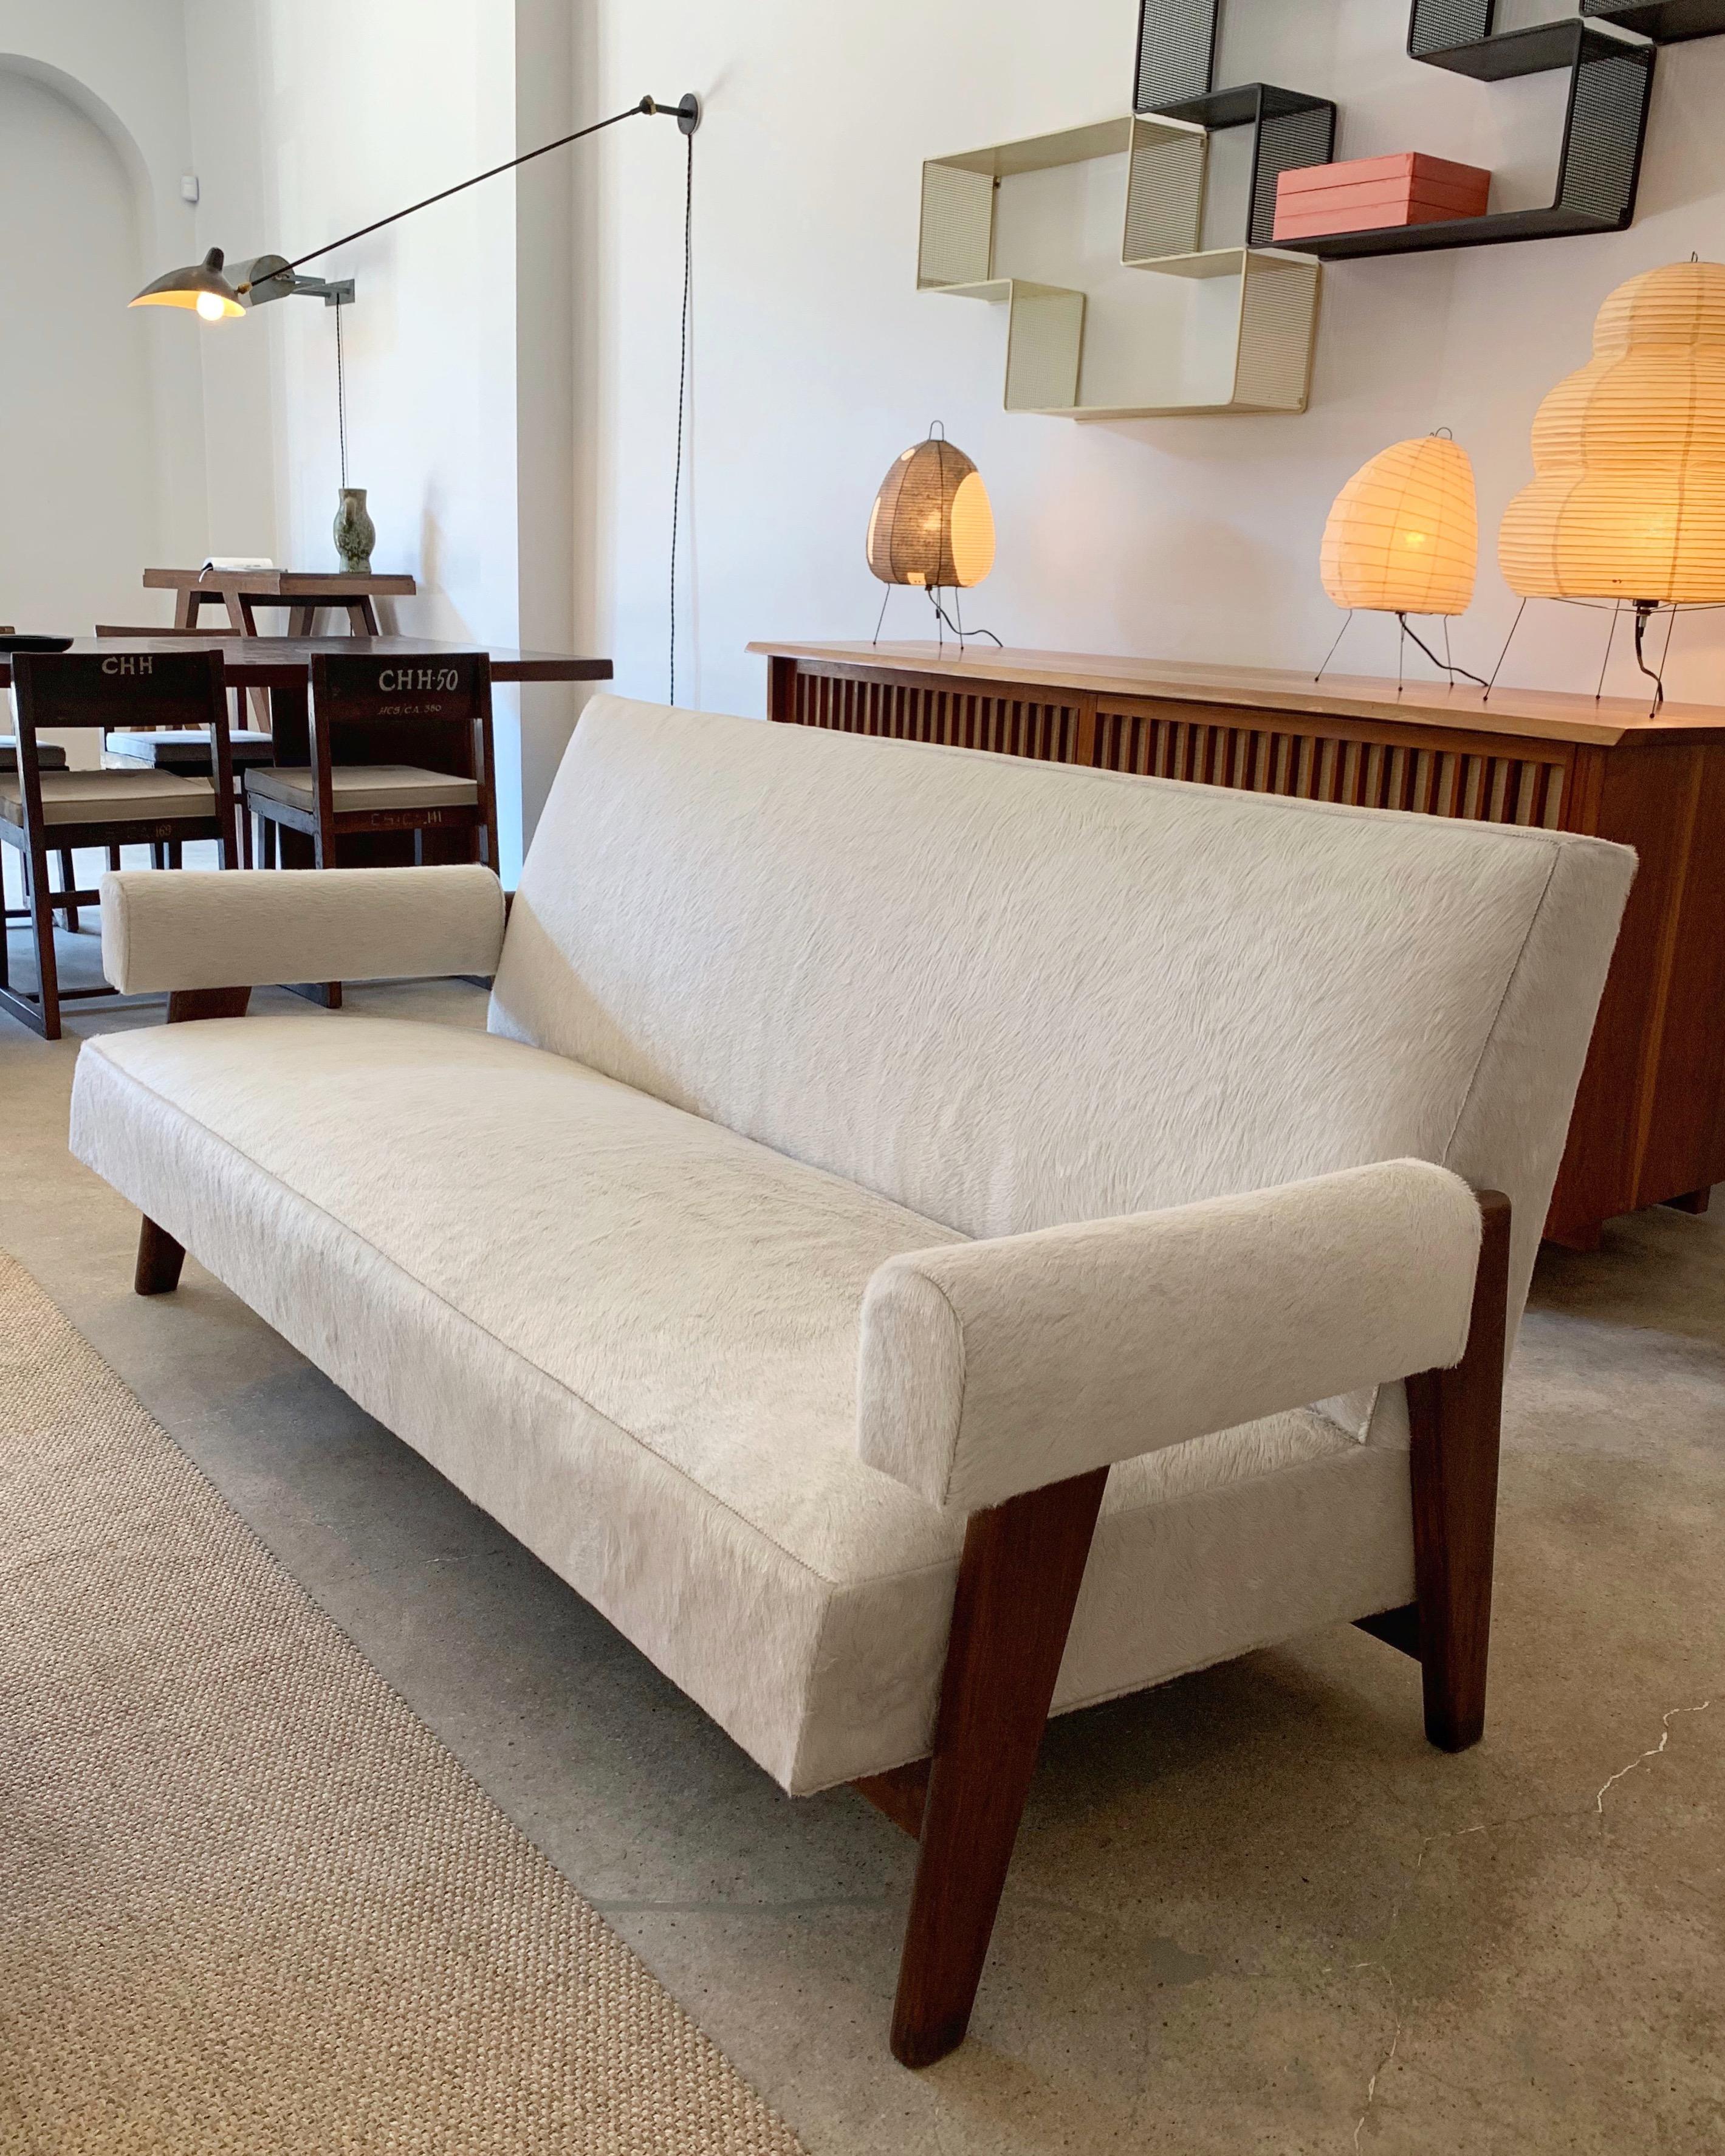 Rare Le Corbusier & Pierre Jeanneret sofa designed for the High Court and Assembly, Chandigarh, circa 1955-1956.

Restored with a stunning off white hide. 

Images prior to restoration available.